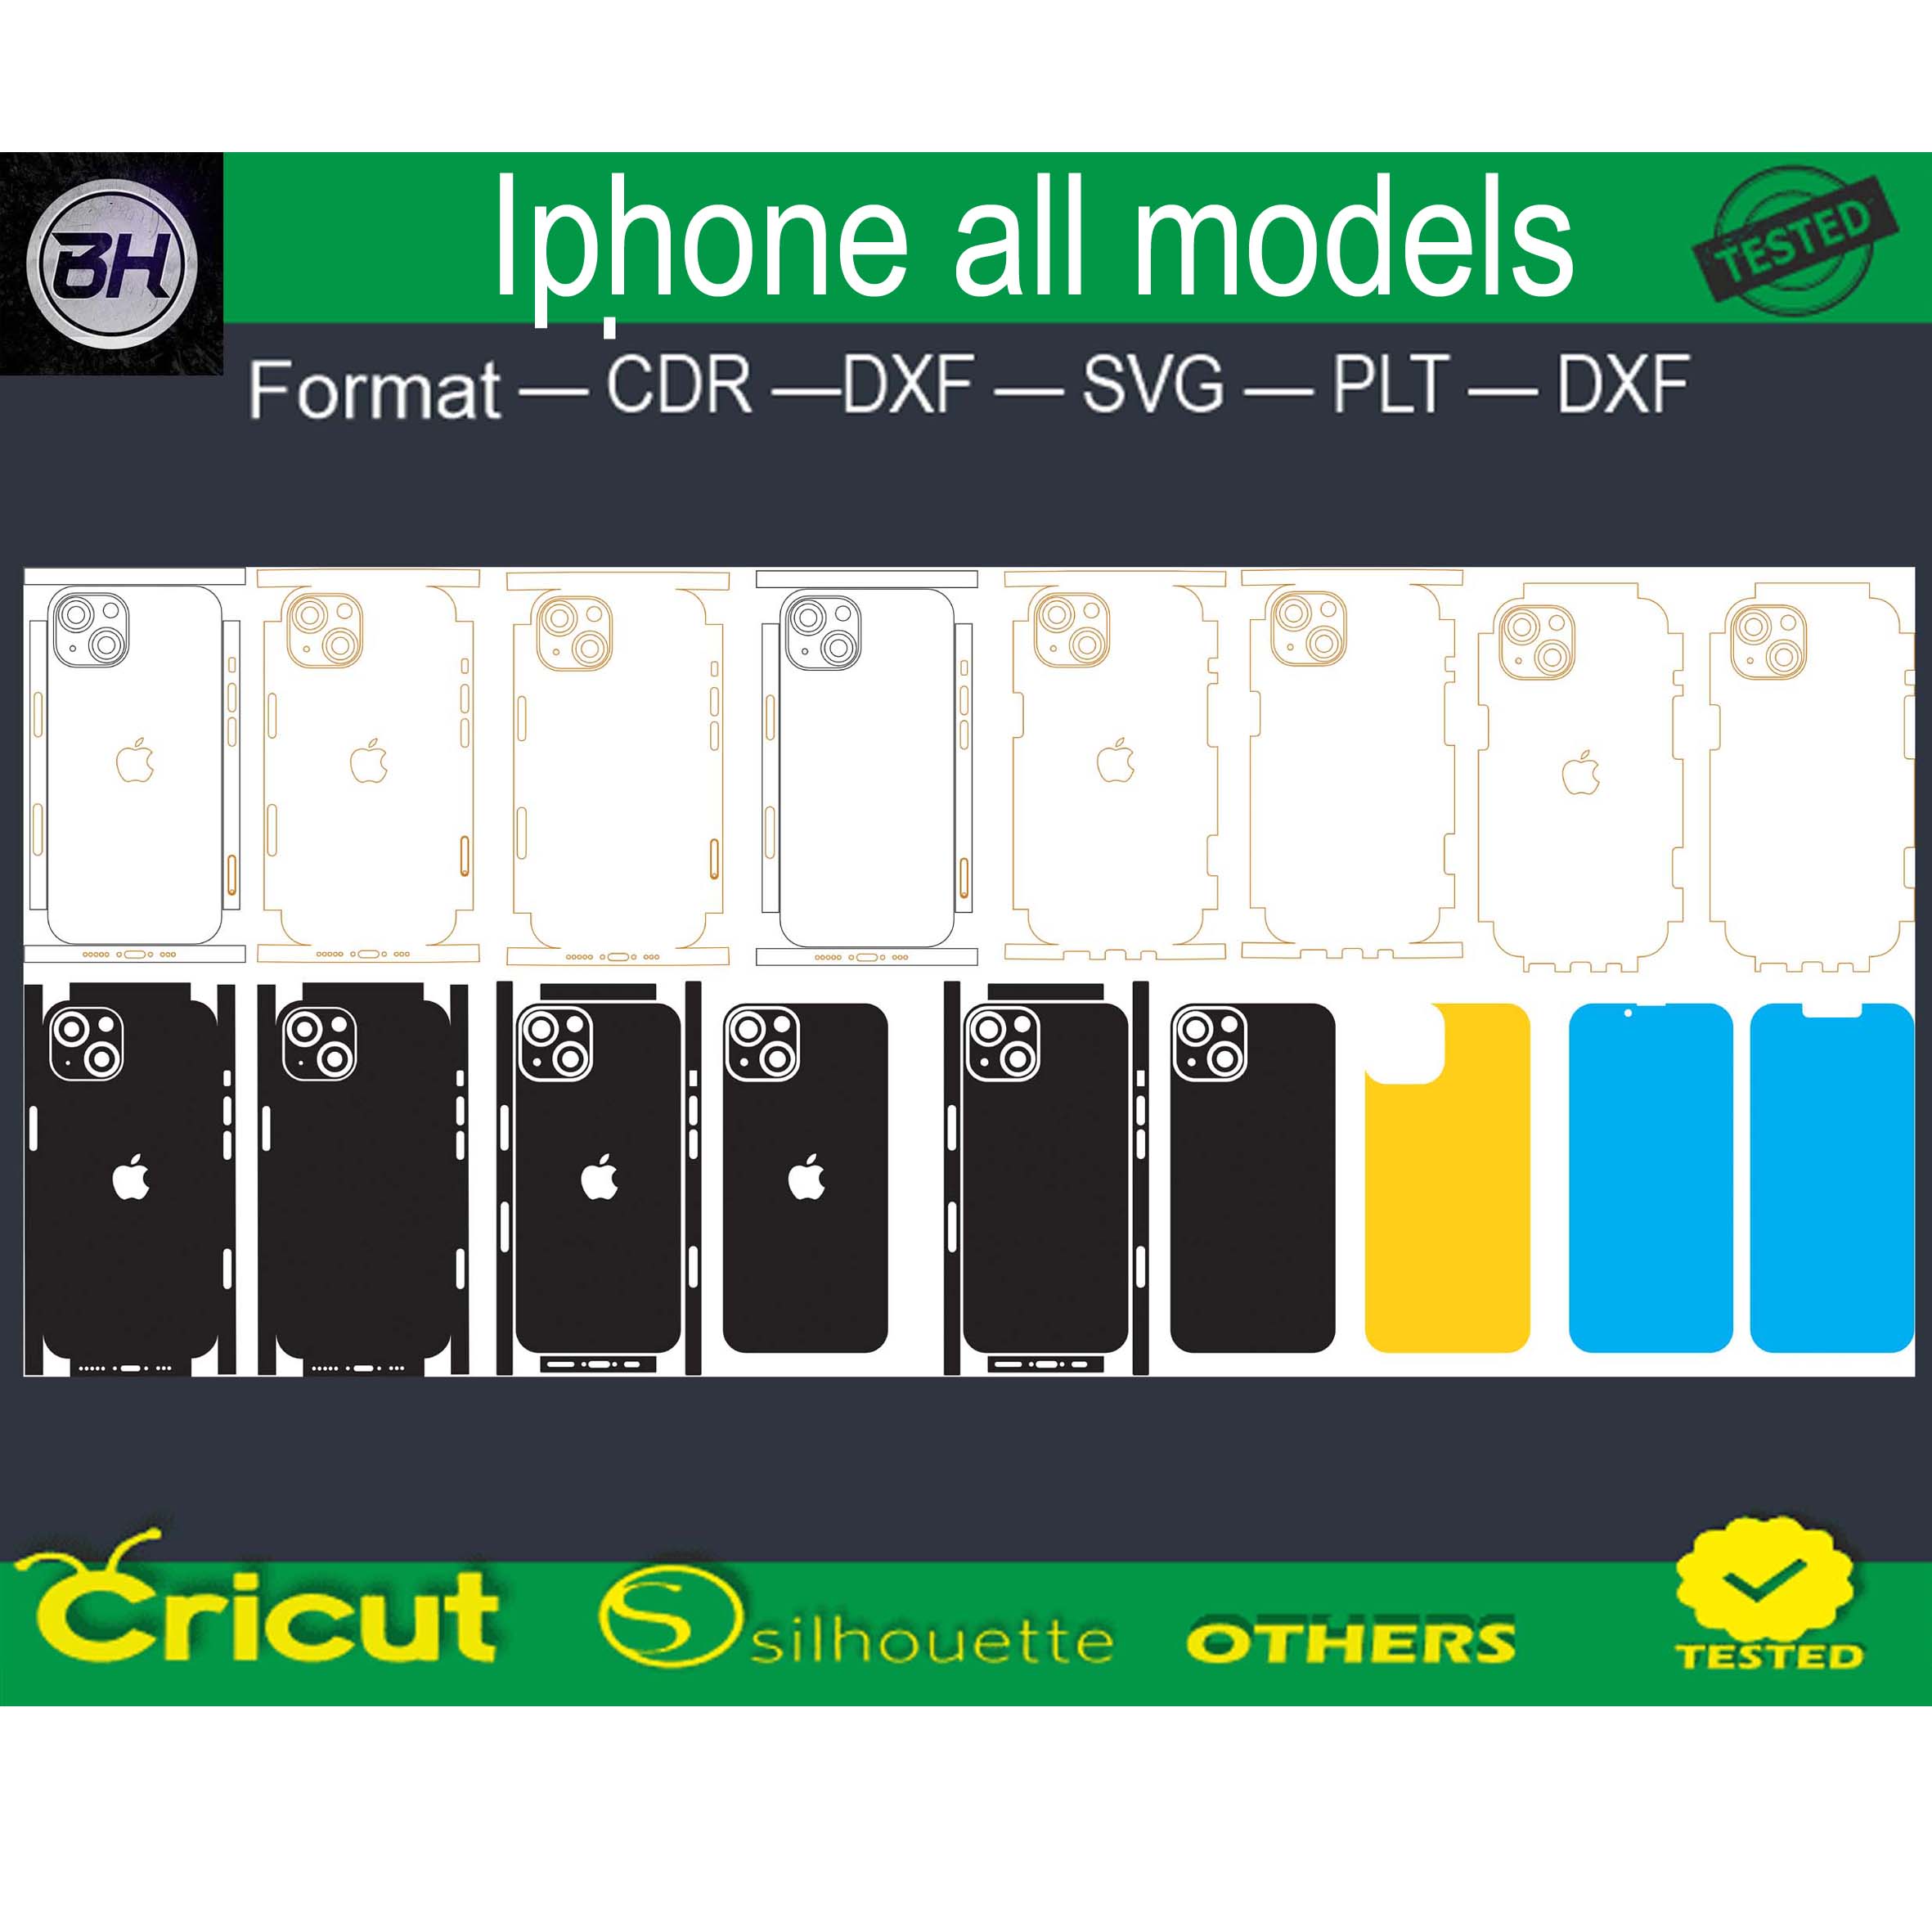 Iphone all models skin template ready to cut cover image.